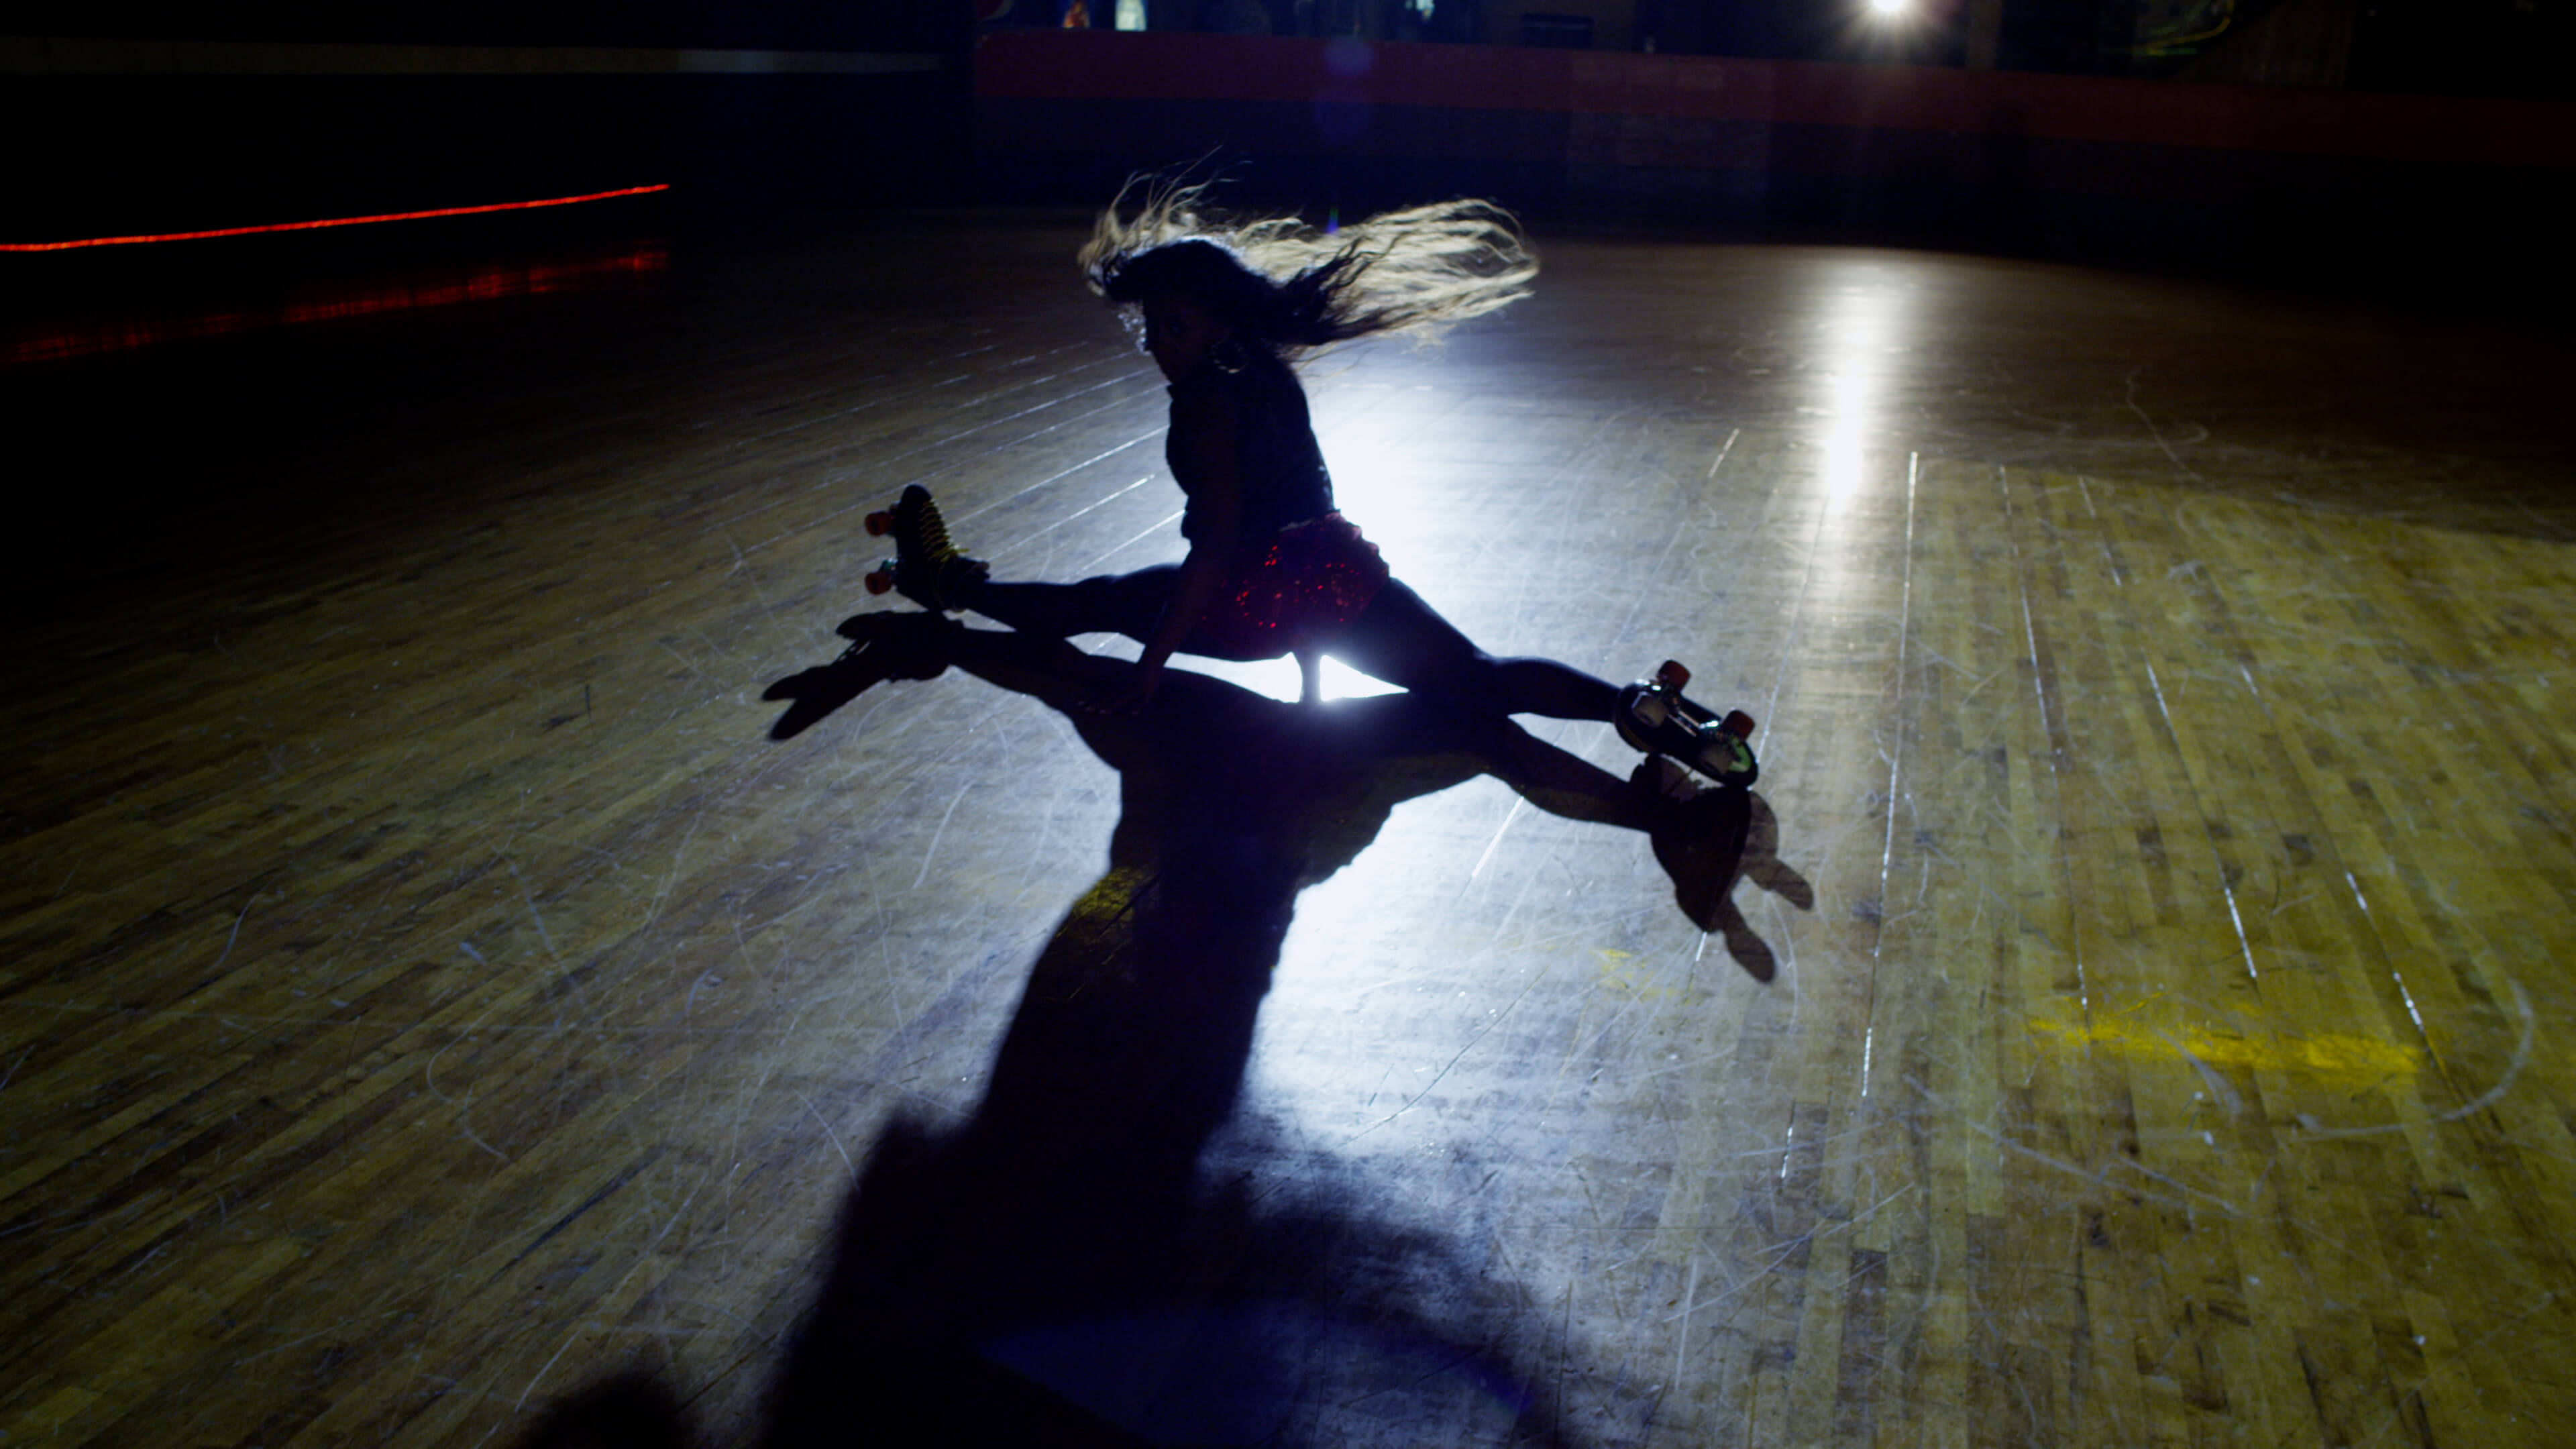 Still from United Skates. A woman in skates on a skating rink is doing the splits. The image is backlit.